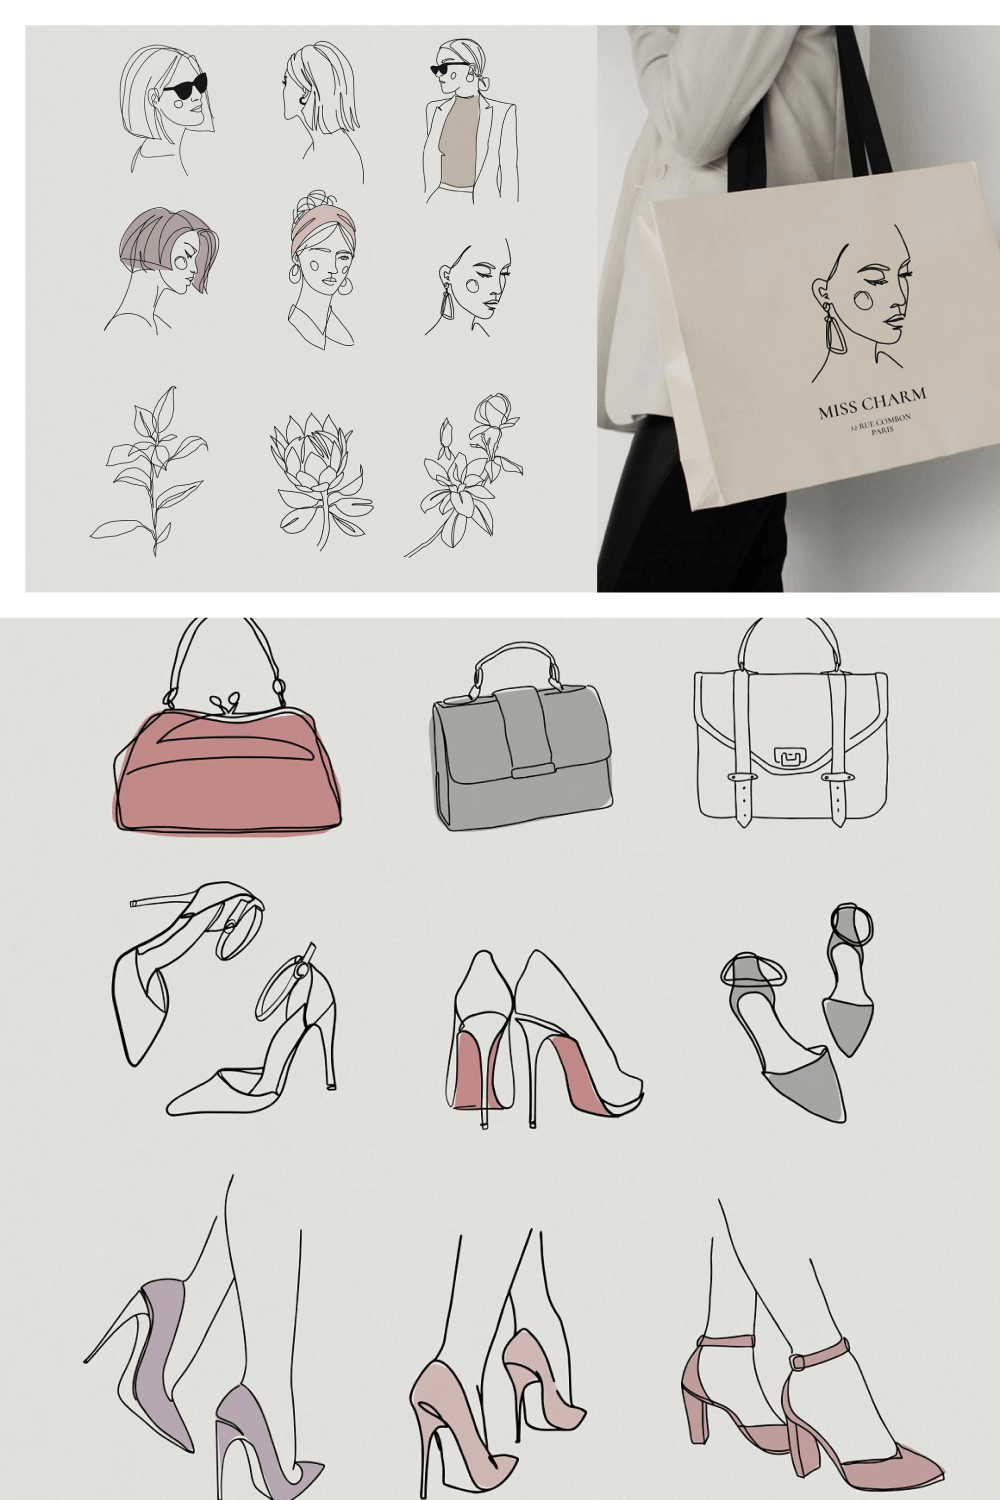 An image of women's things on envelopes.